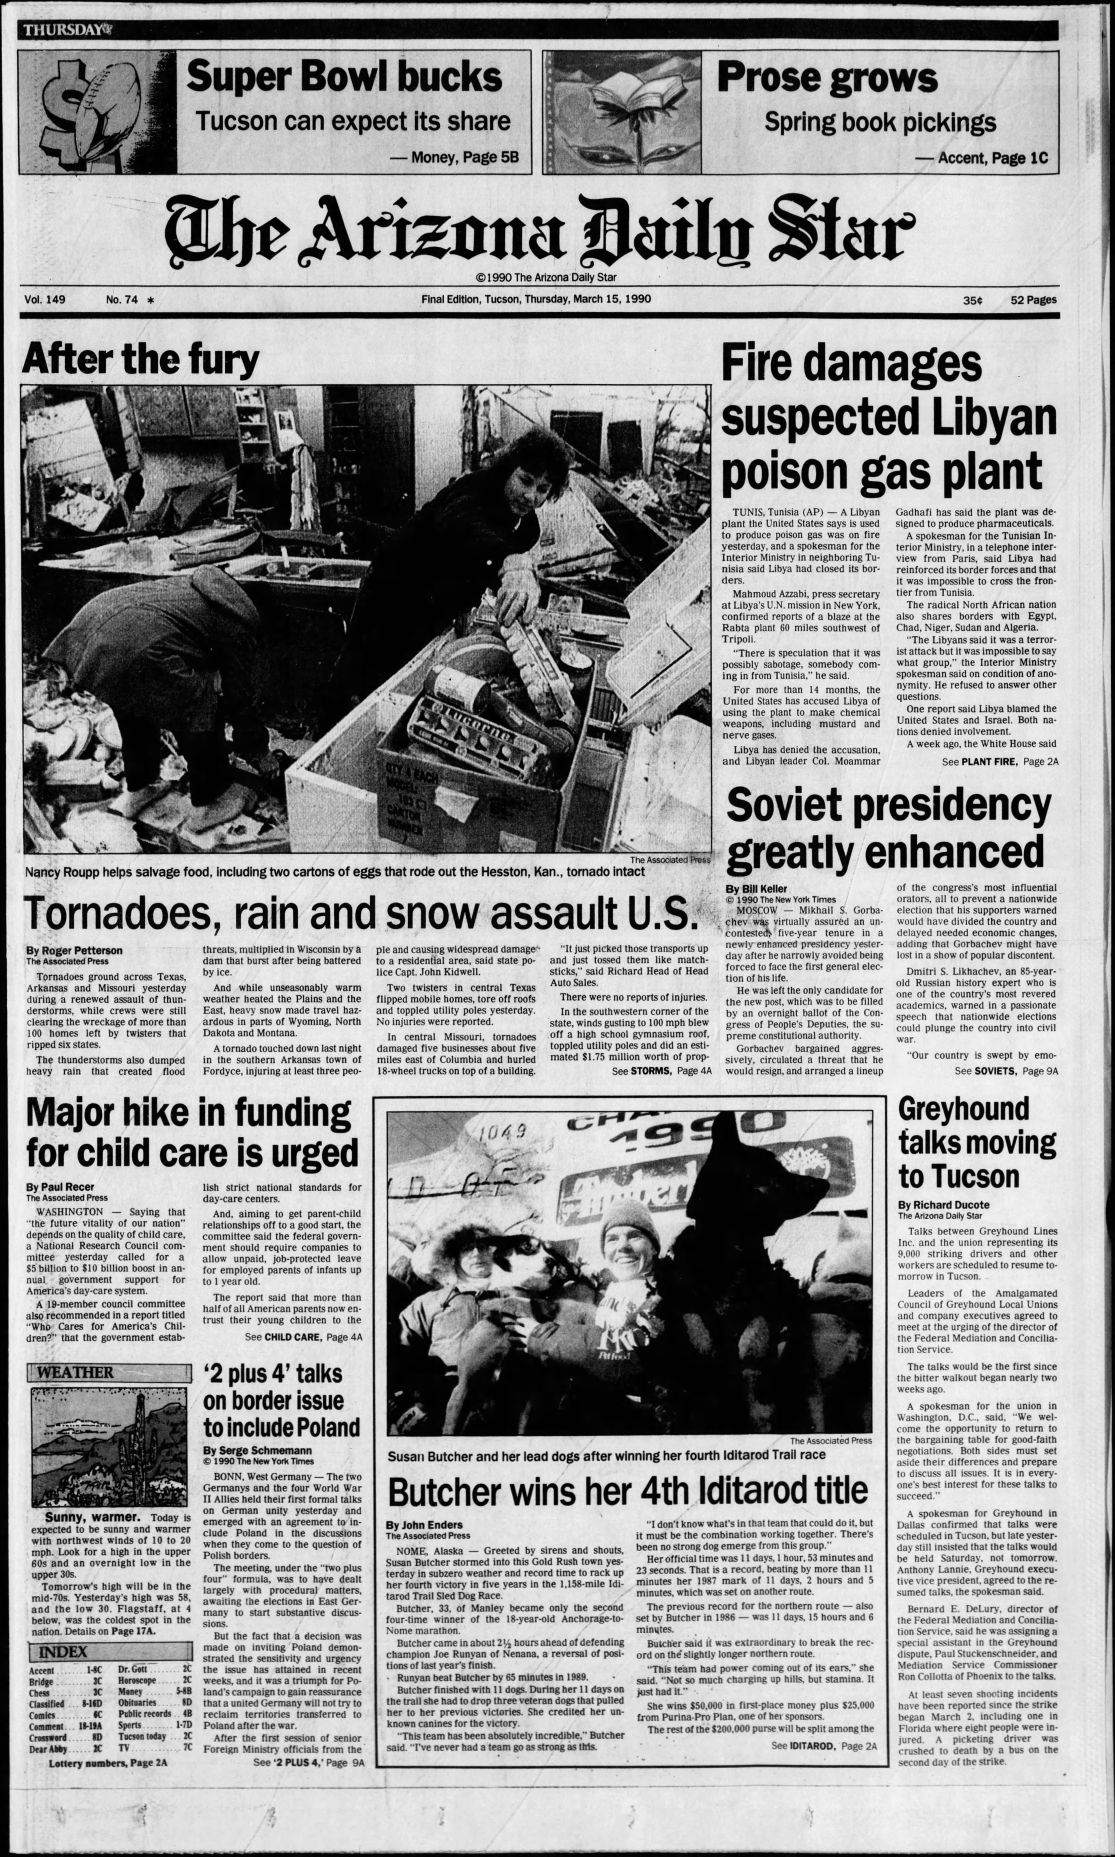 Arizona Daily Star front page March 15, 1990